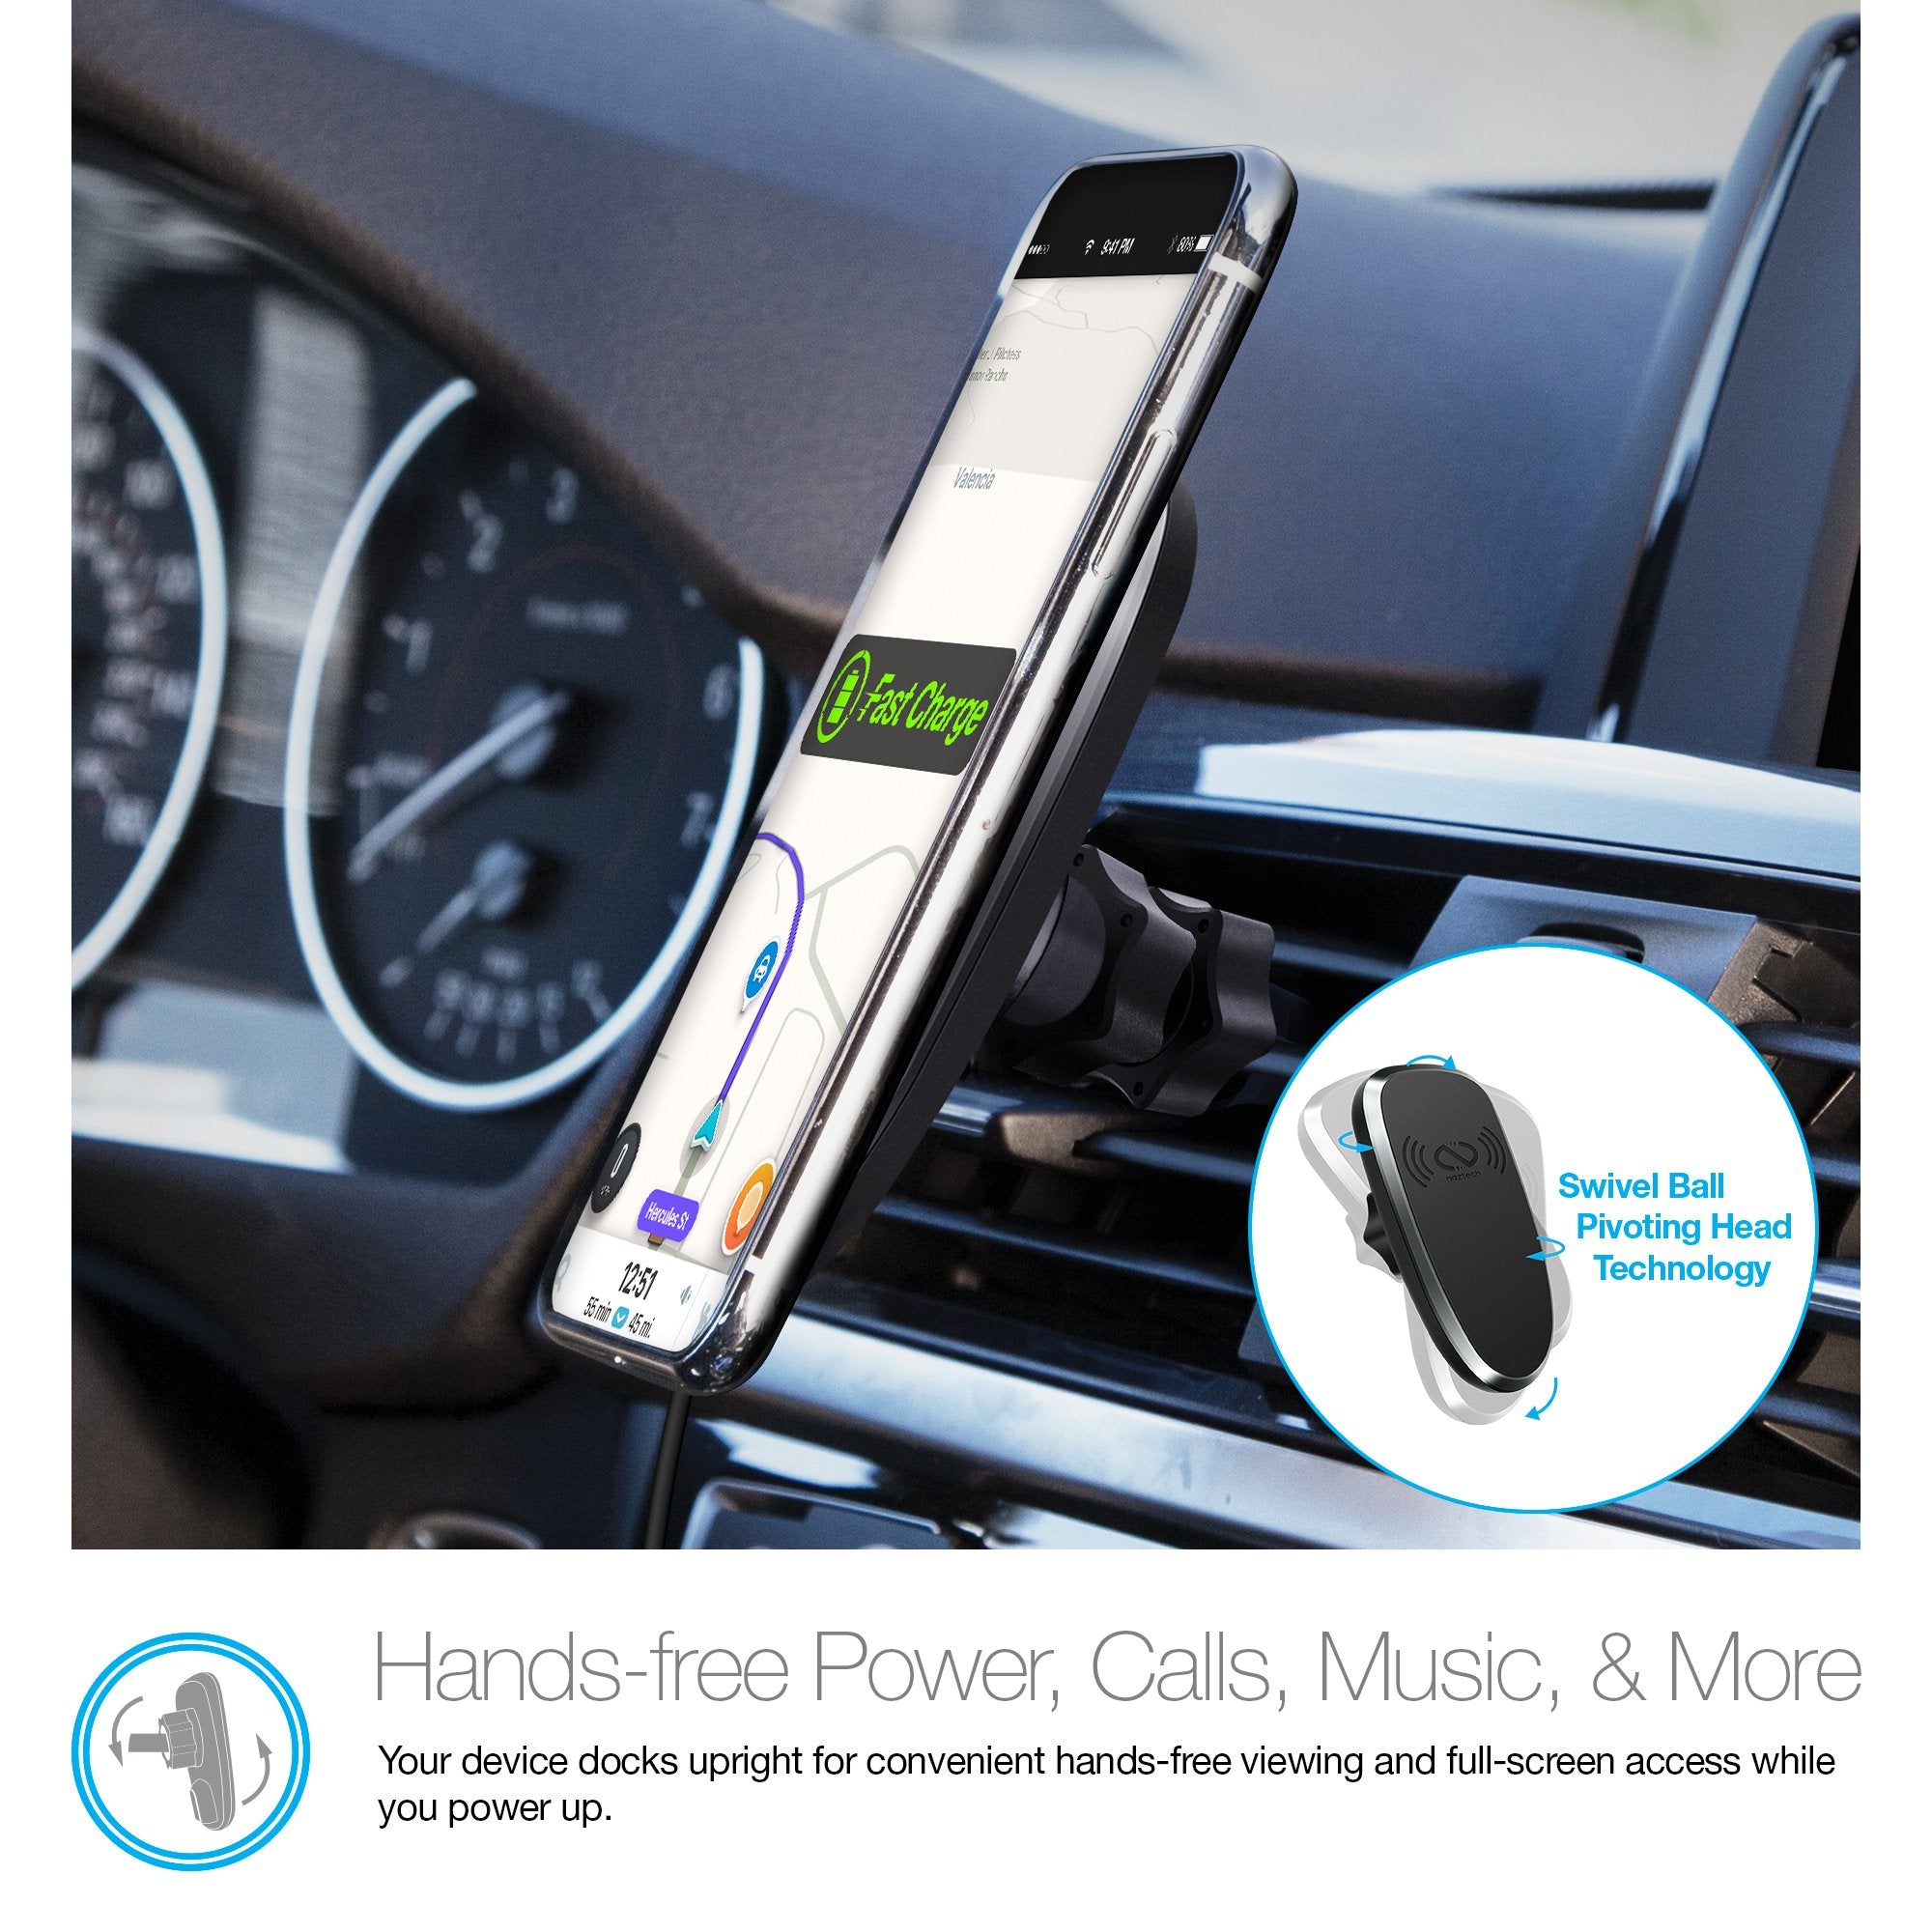 Naztech MagBuddy Magnetic Wireless Charging Vent Mount